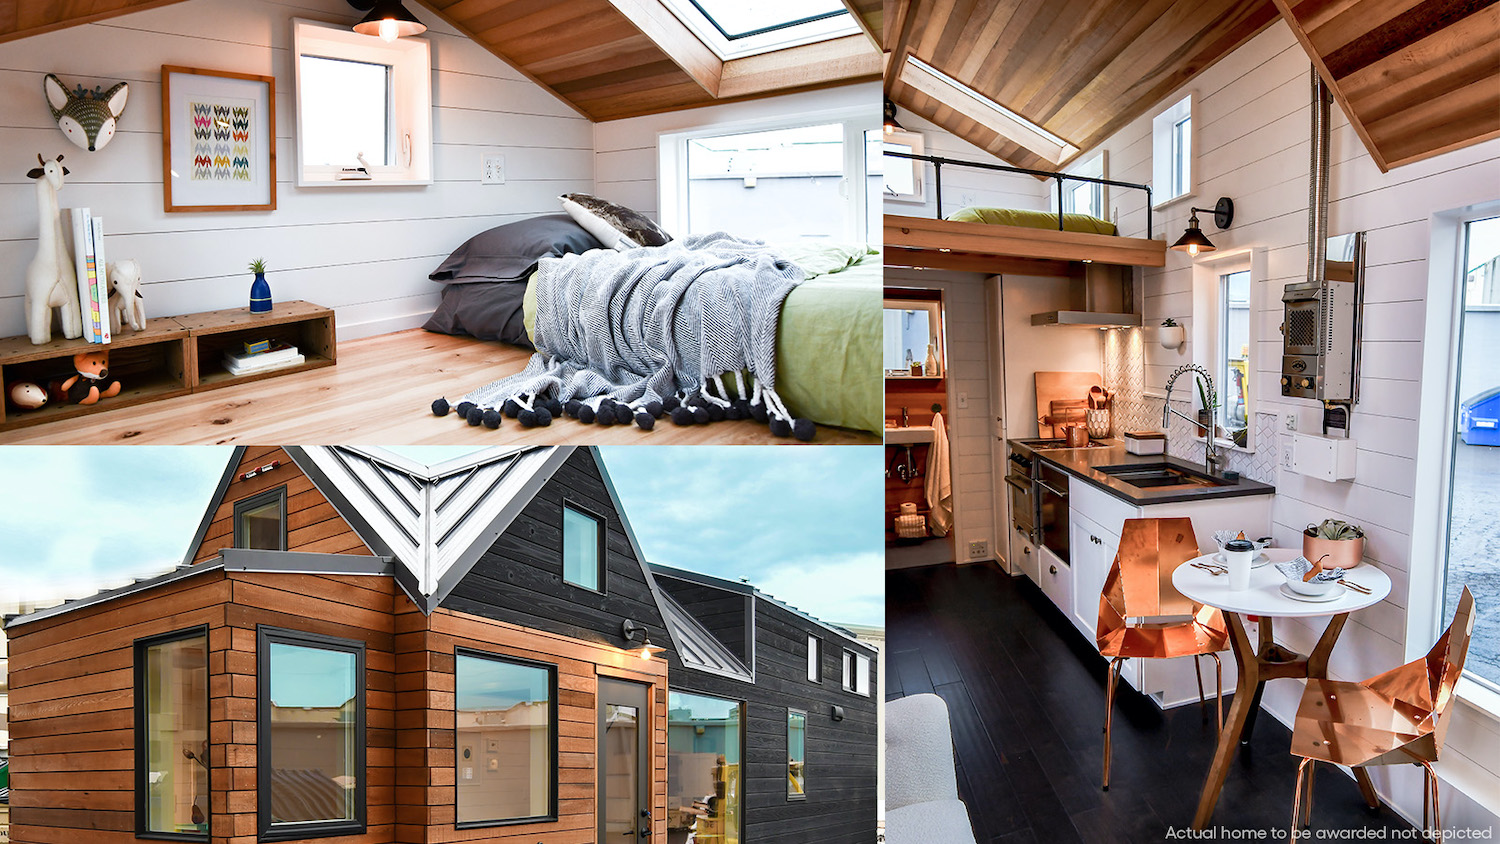 Three images of a tiny home built by Tru Form Tiny. Omaze is giving away a custom build from the Oregon company.